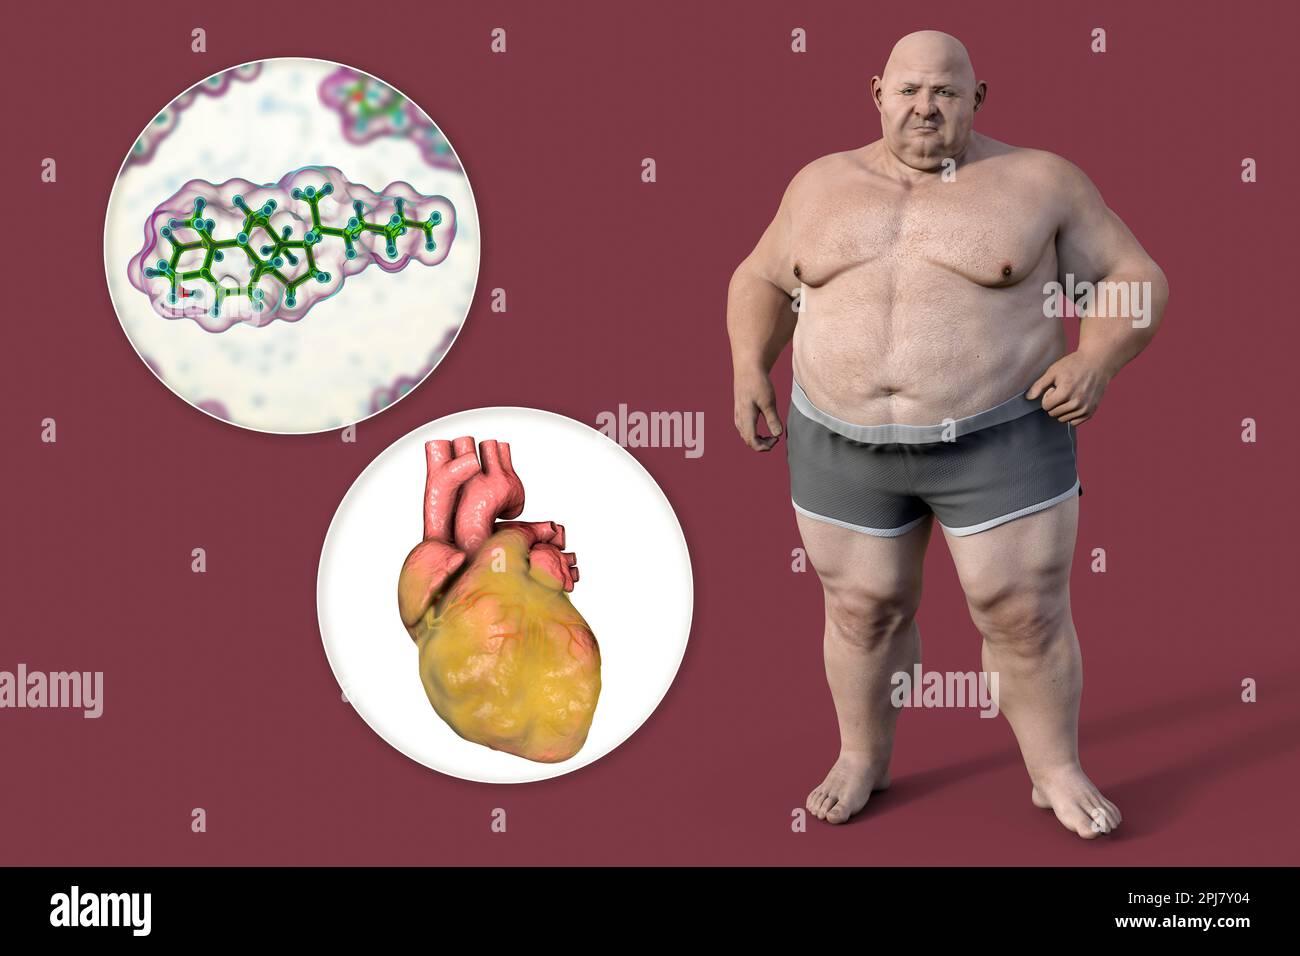 Cholesterol and fatty heart in overweight man, illustration Stock Photo